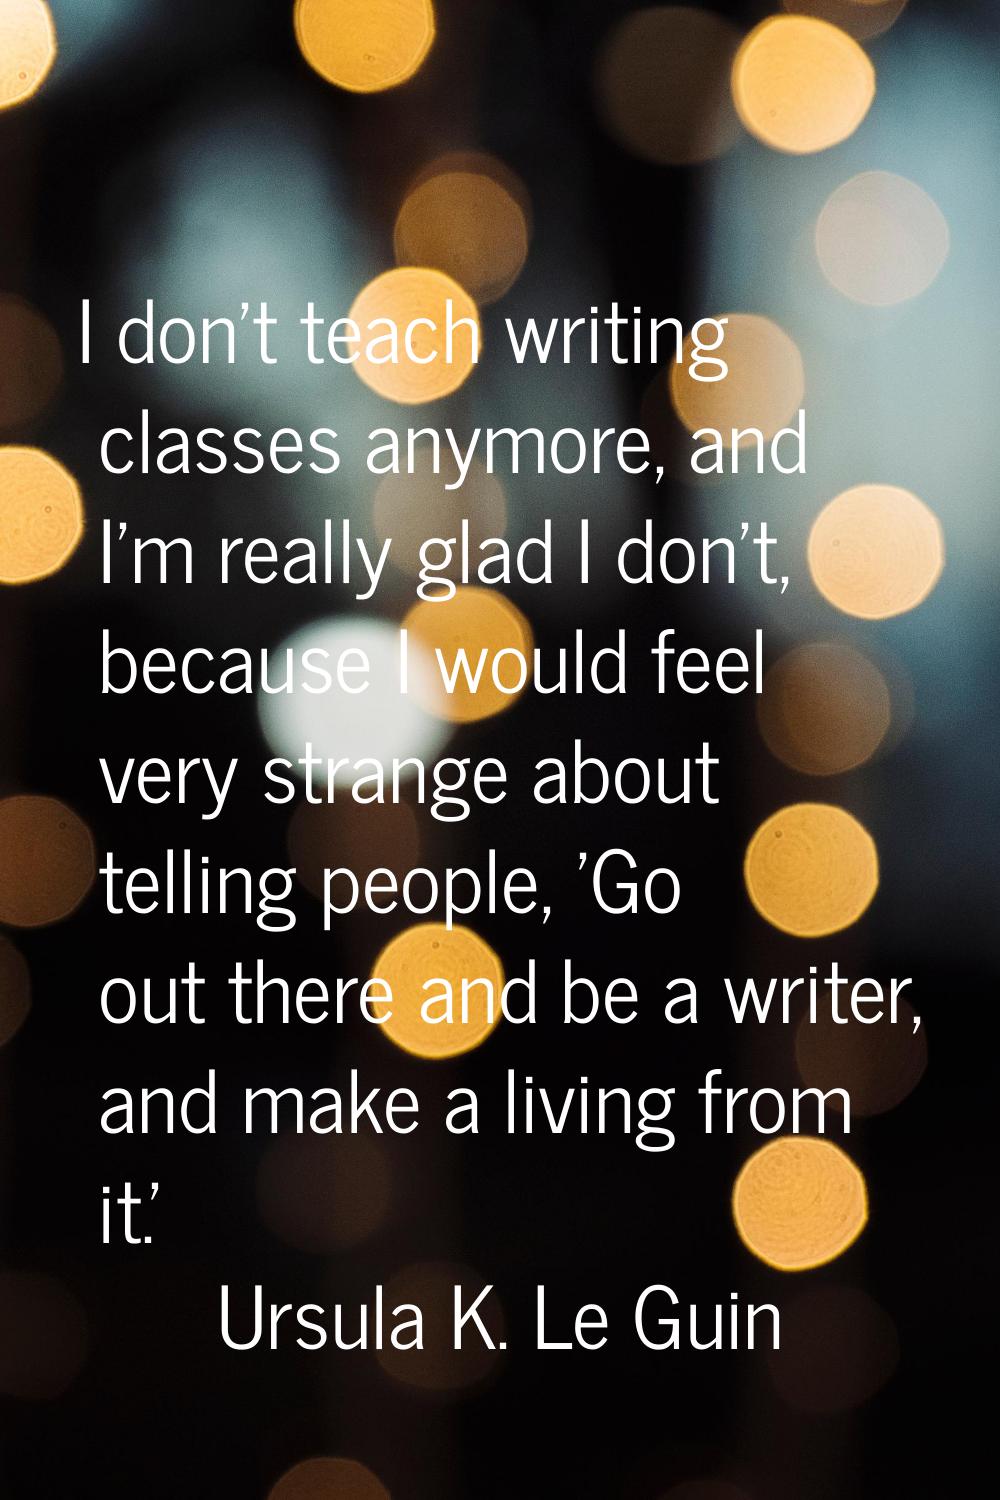 I don't teach writing classes anymore, and I'm really glad I don't, because I would feel very stran